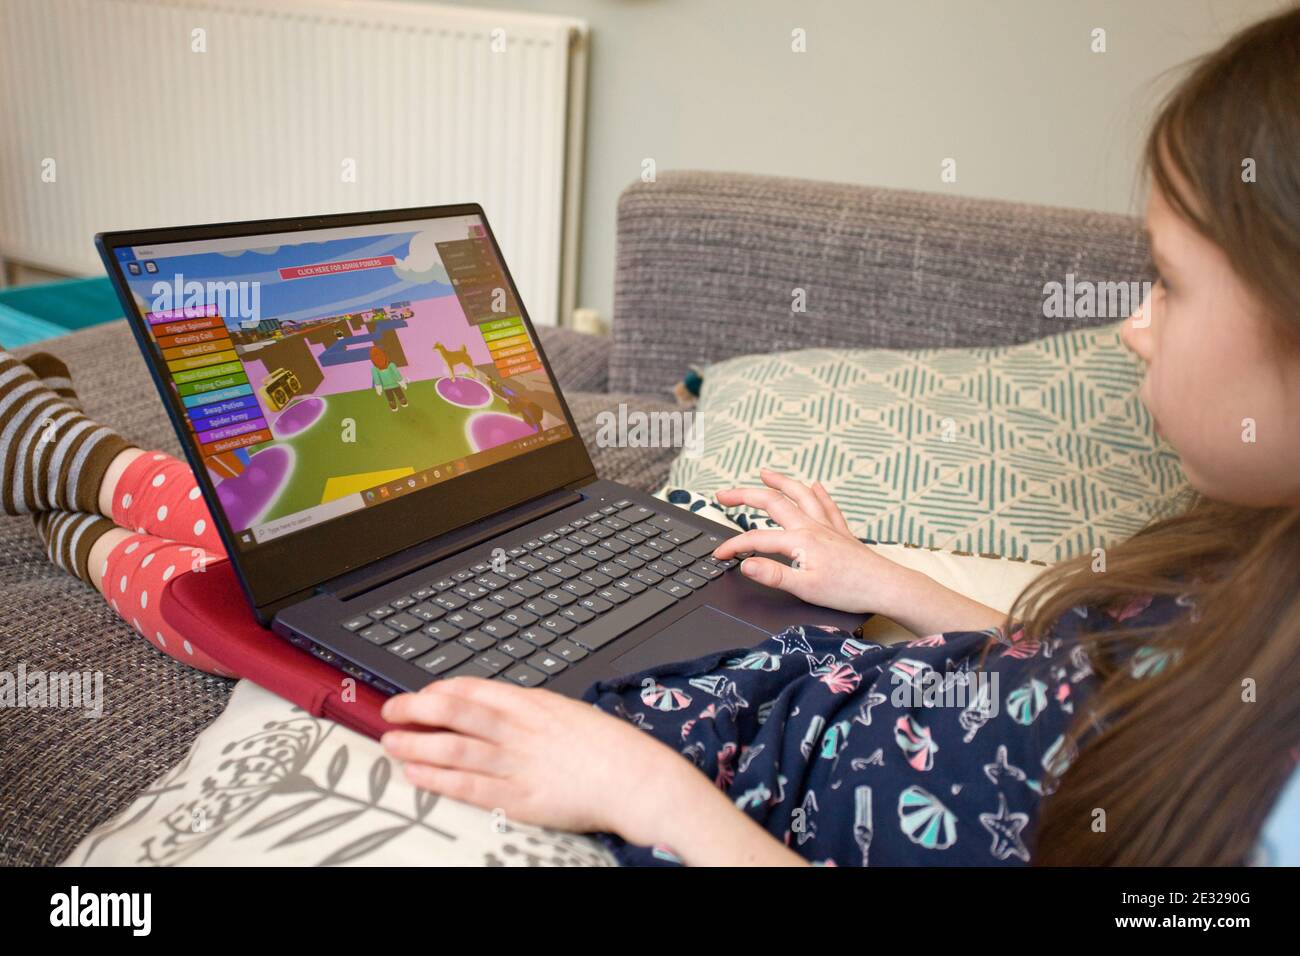 Roblox Game On Computer Screen. Monitor, Keyboard And Airpods On Wooden  Table. Selective Focus. Stock Photo, Picture and Royalty Free Image. Image  176369548.